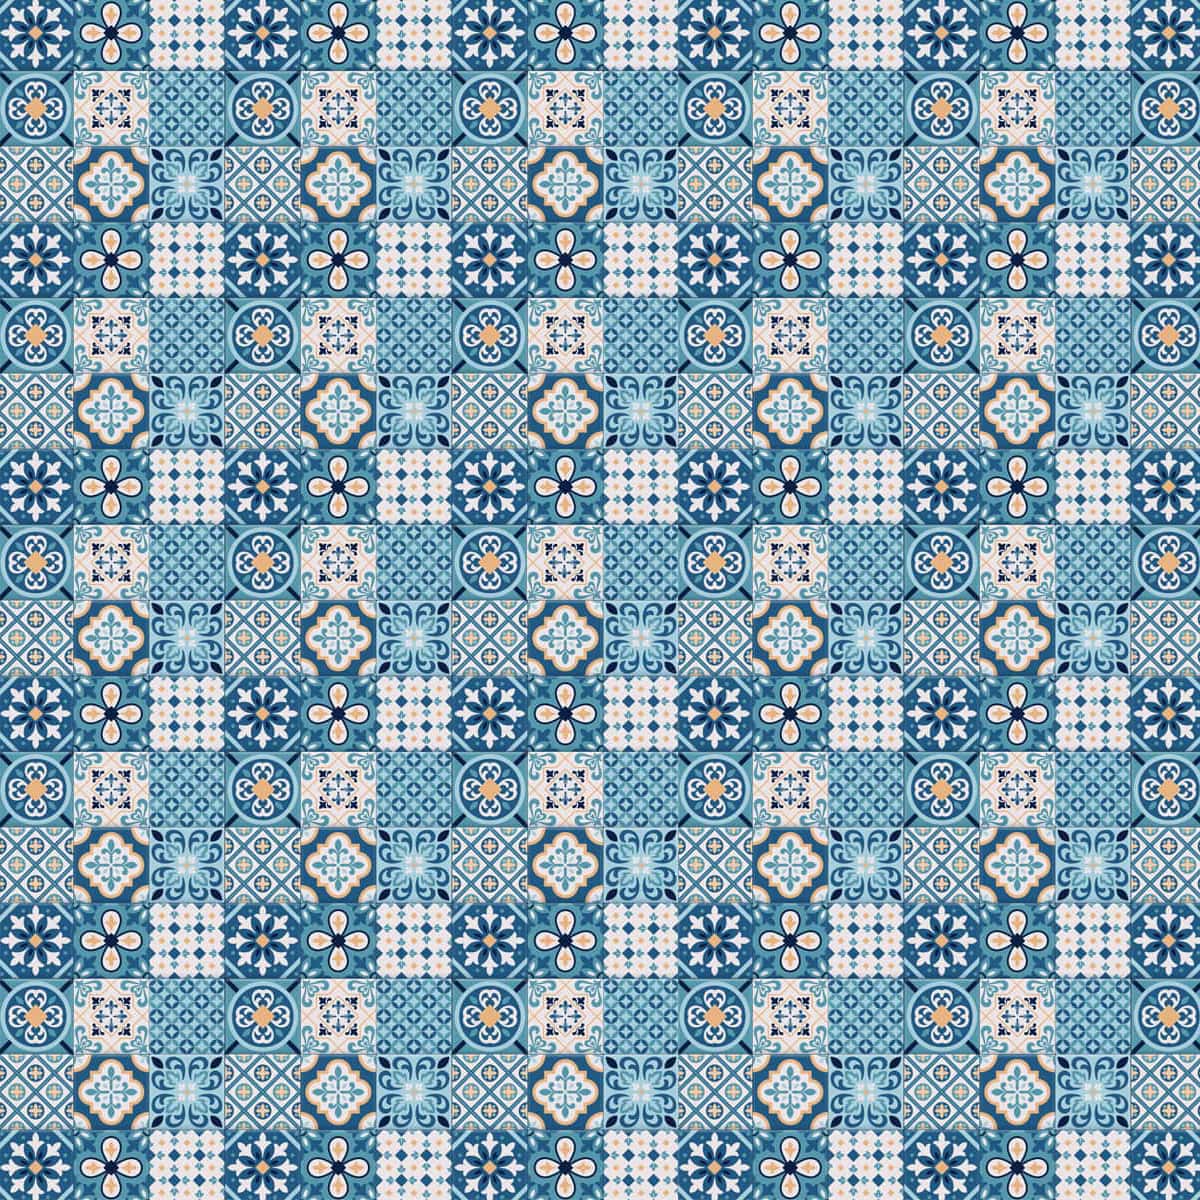 Moroccan Blue Ceramic Tiles Inspired Wall Paper for Homes